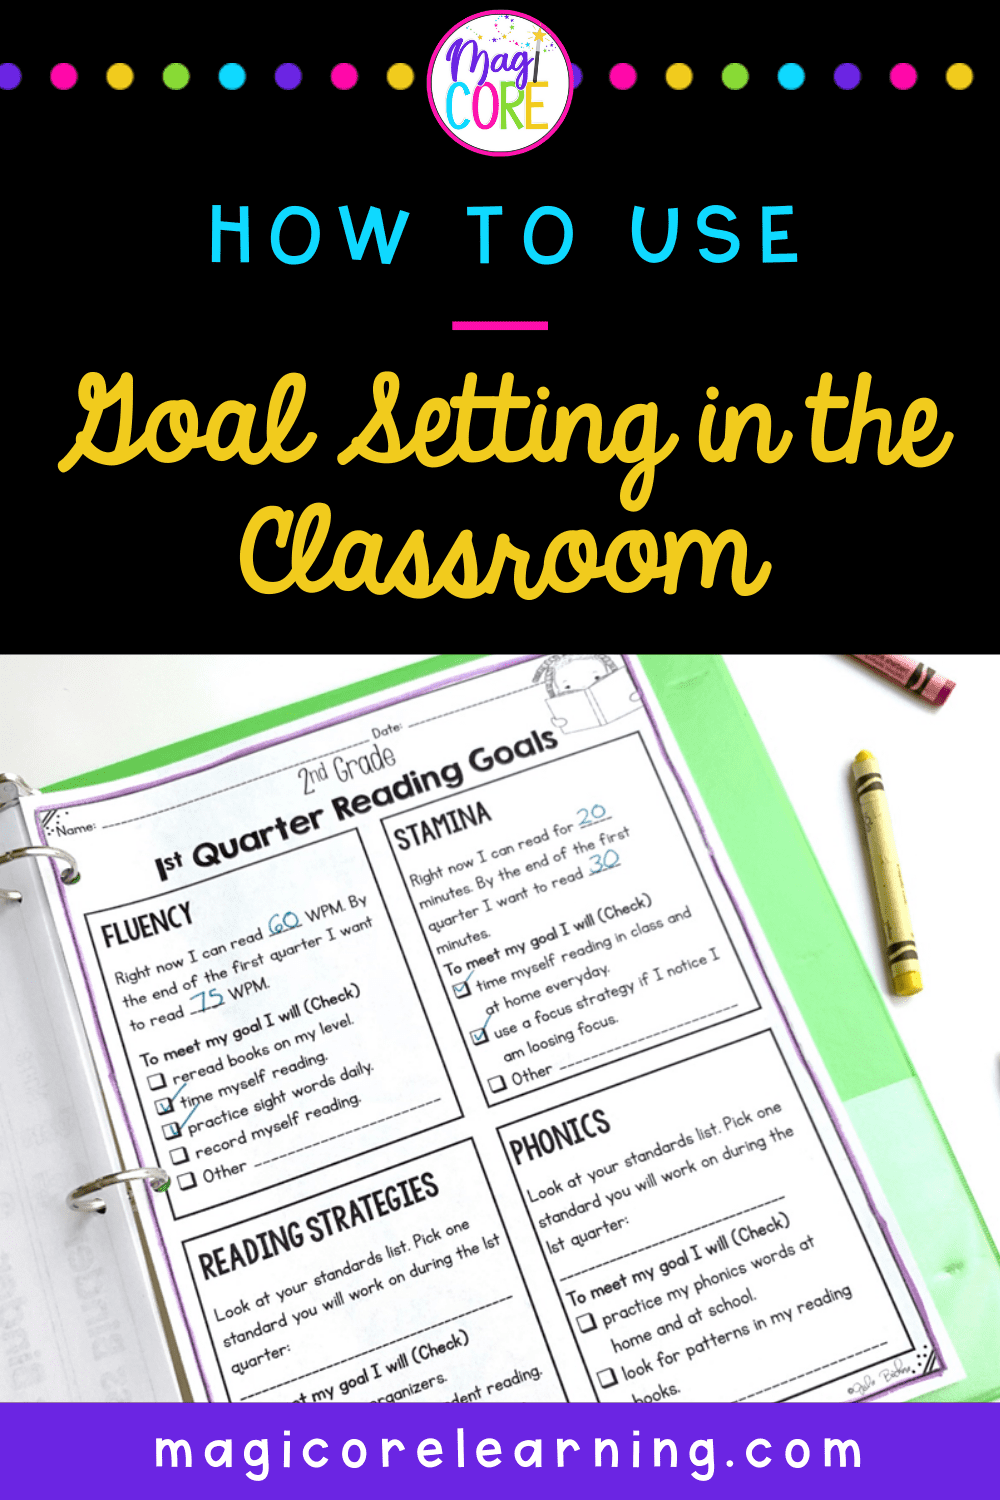 How to use goal setting in the classroom pin cover for blog post